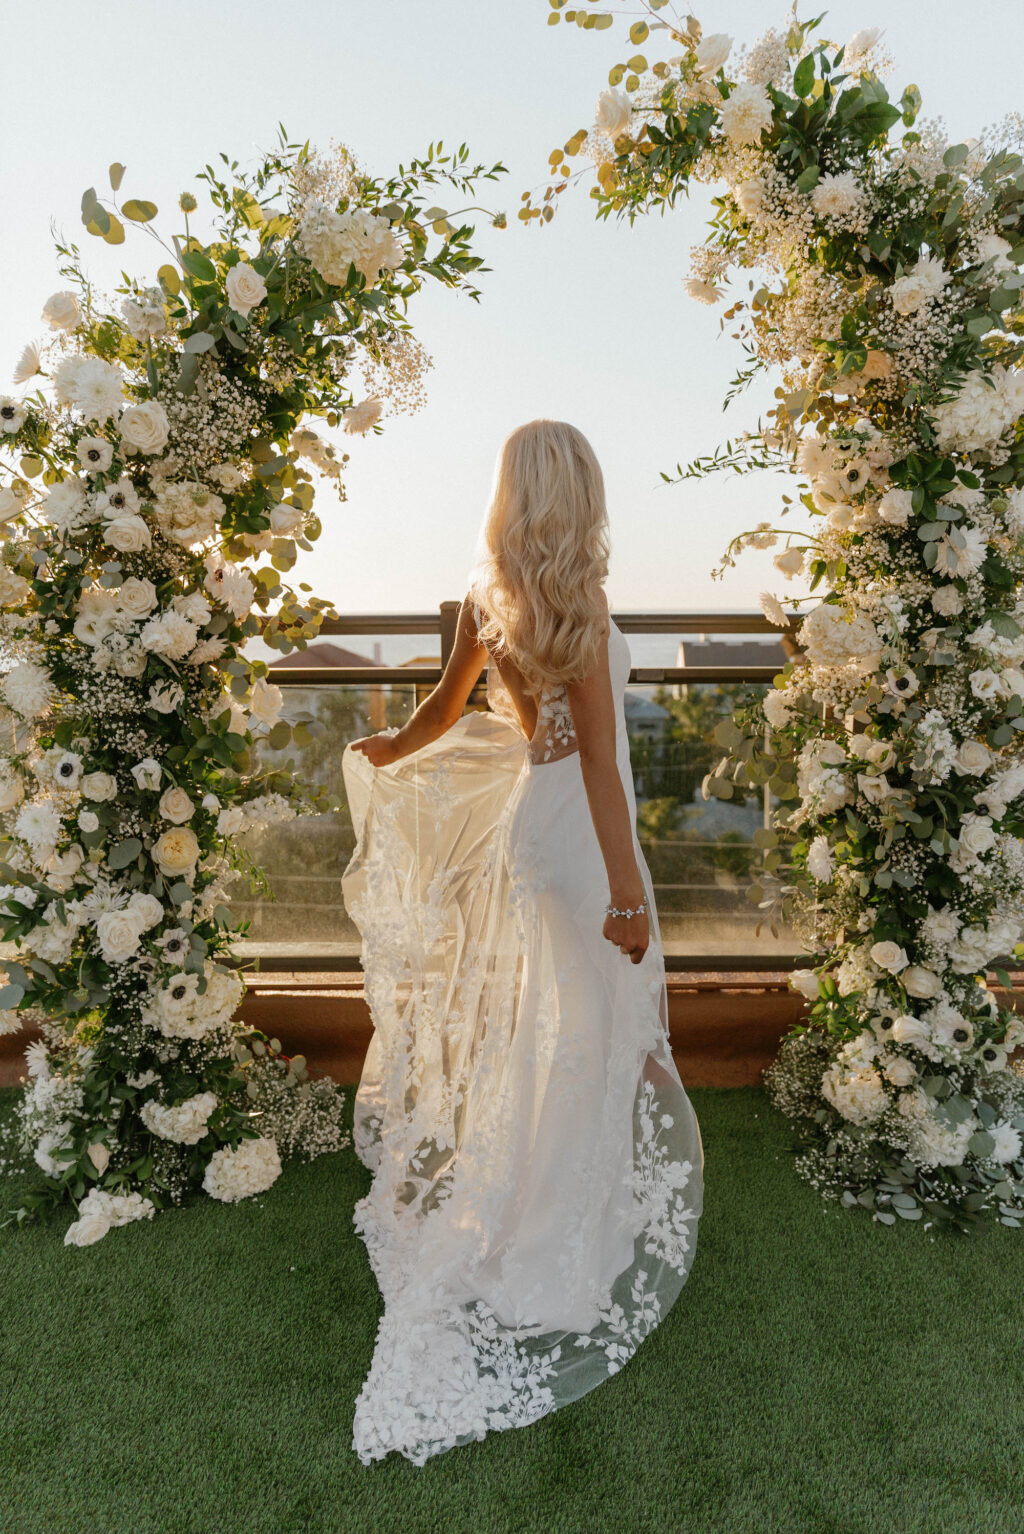 Bride in Illusion Lace Back Wedding Dress Golden Hour Wedding Portrait in Front of Floral Ceremony Arch Inspiration | St. Pete Beach Lemon Drops Weddings & Events